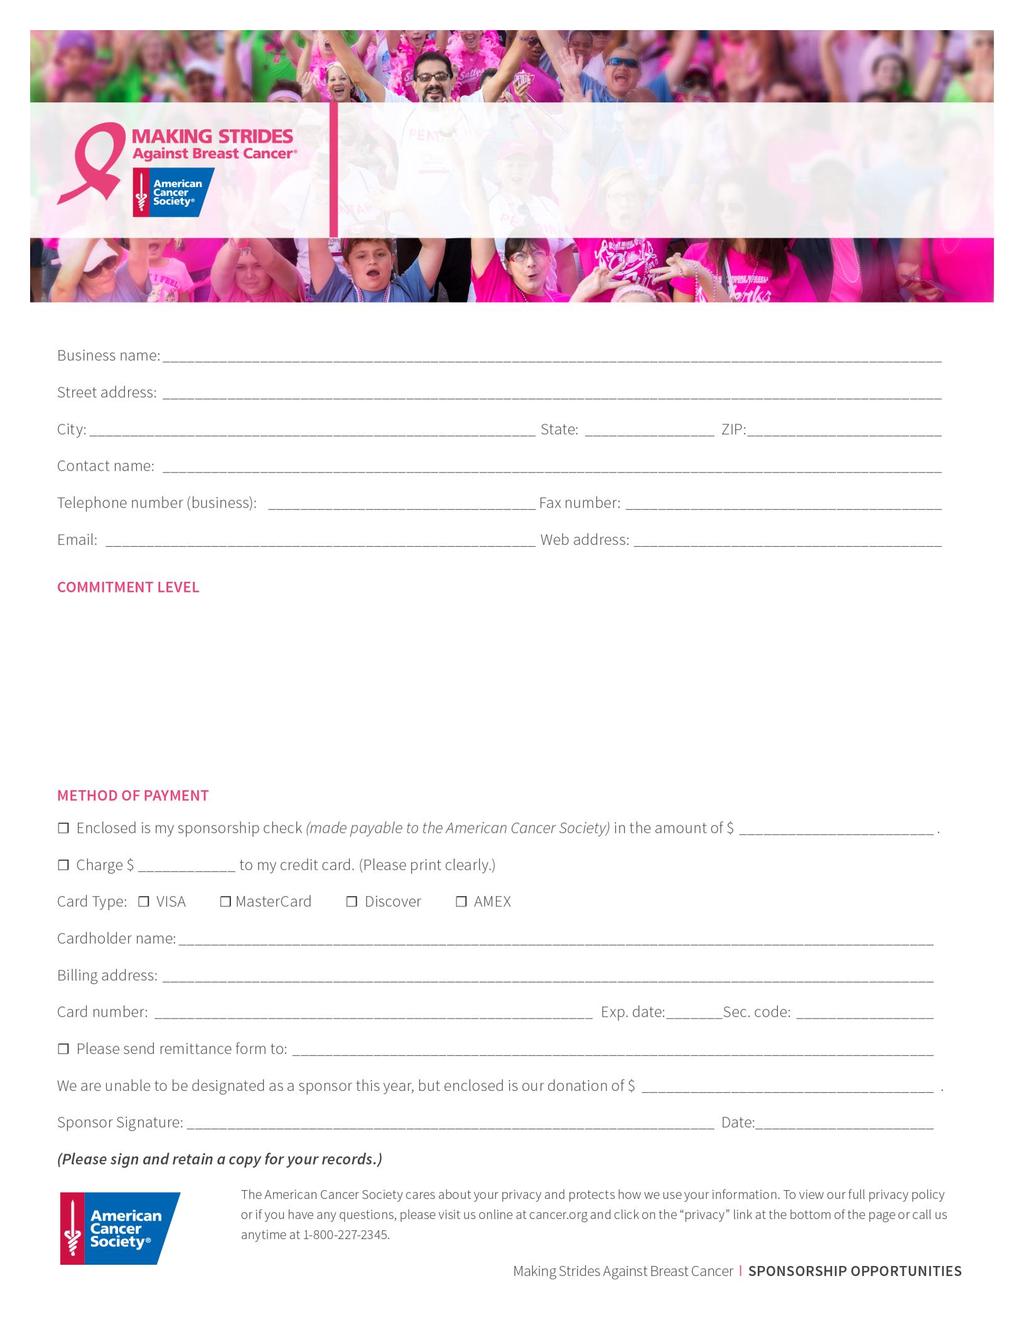 Making Strides Against Breast Cancer of Point Pleasant Beach 2018 SPONSORSHIP COMMITMENT FORM $17,500 Flagship $7,500 Platinum $5,000 Gold $2,500 Silver $1,500 Business Village Table $1,000 Pink